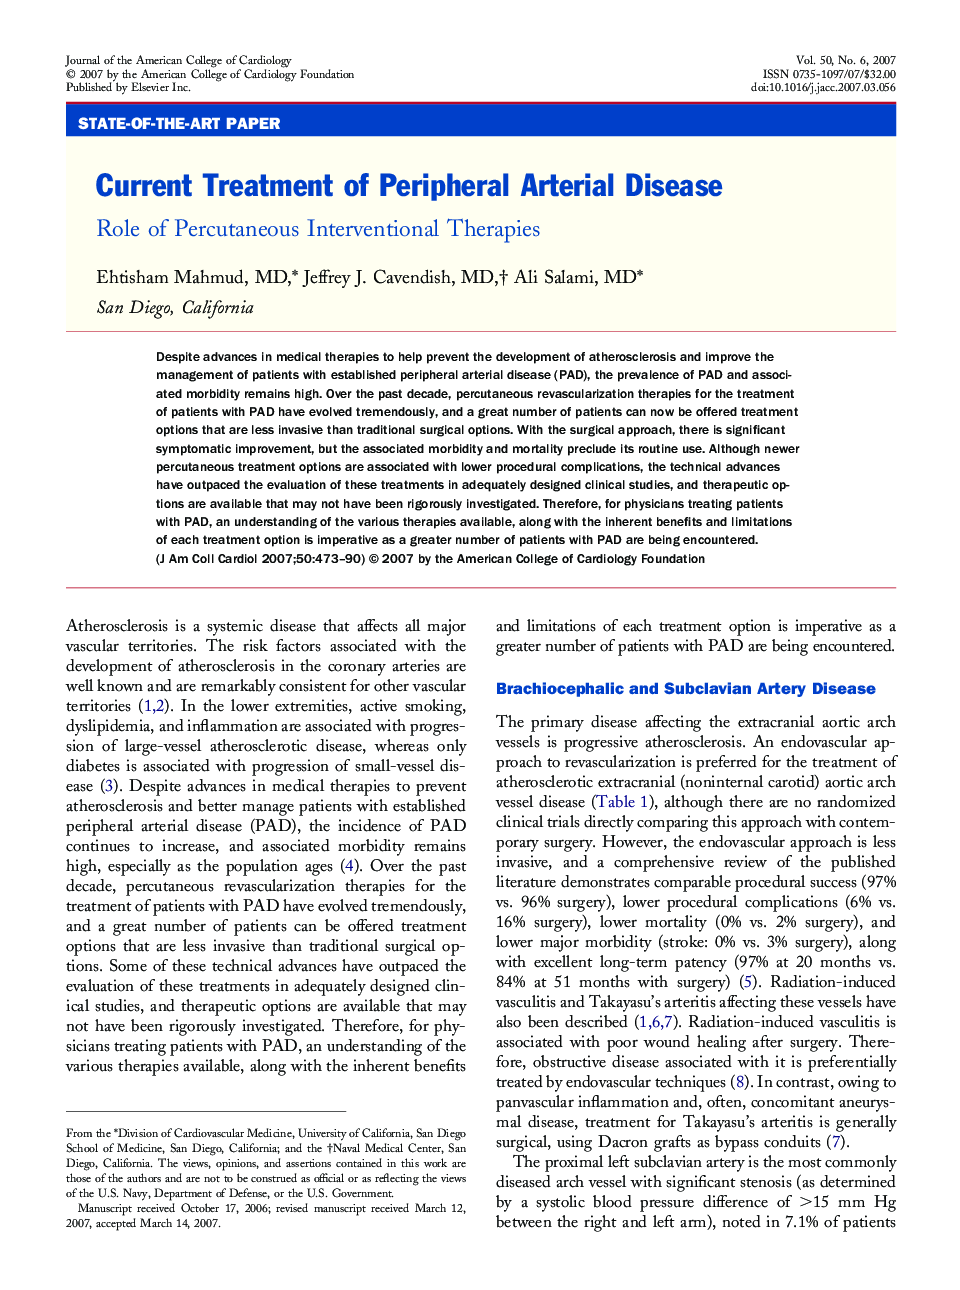 Current Treatment of Peripheral Arterial Disease : Role of Percutaneous Interventional Therapies